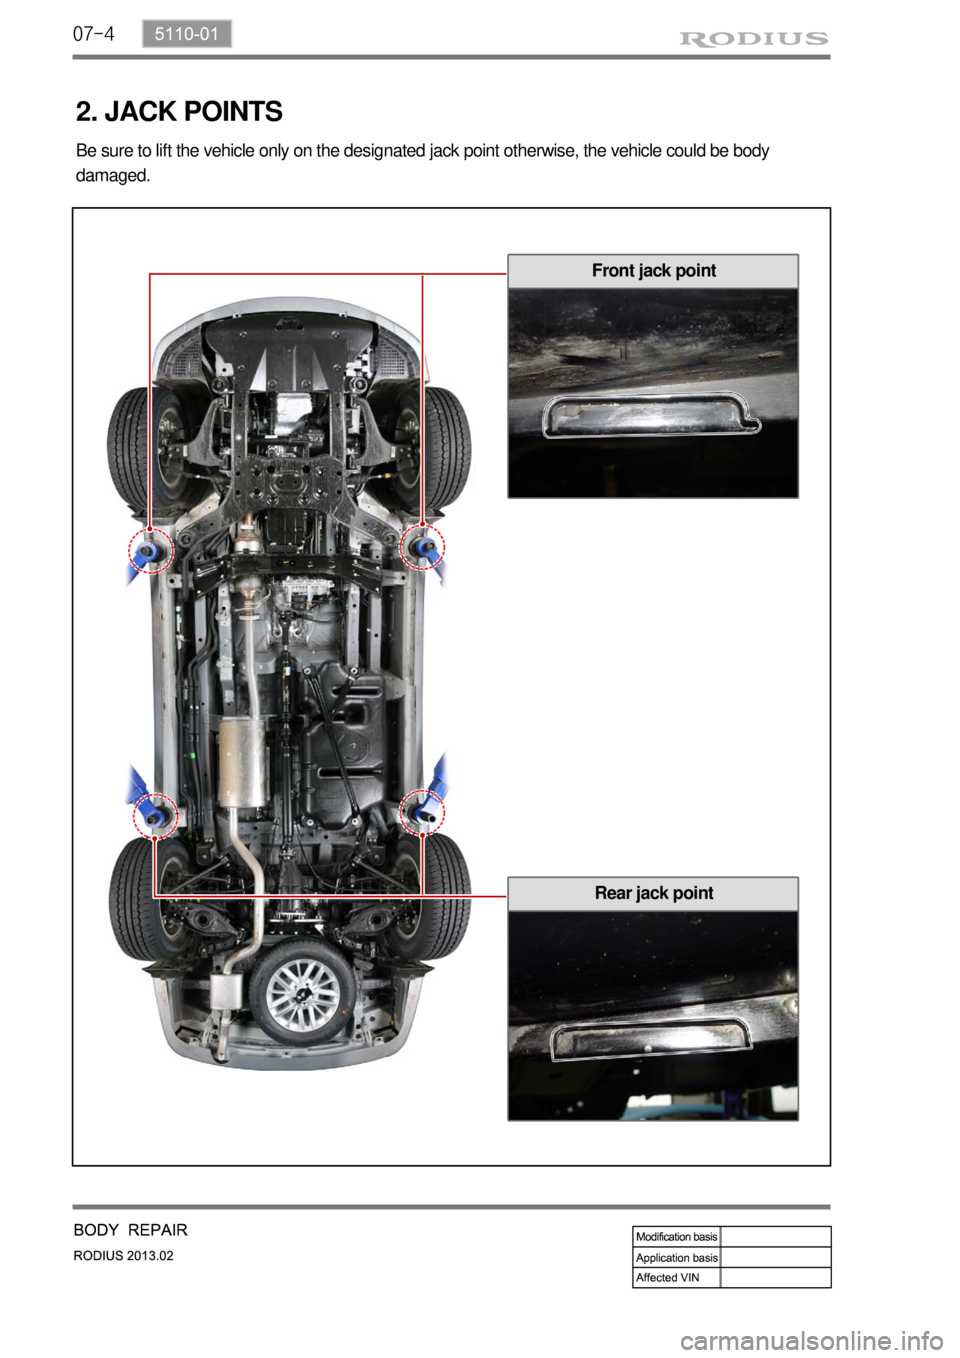 SSANGYONG TURISMO 2013  Service Manual 07-4
2. JACK POINTS
Be sure to lift the vehicle only on the designated jack point otherwise, the vehicle could be body 
damaged.
Front jack point
Rear jack point 